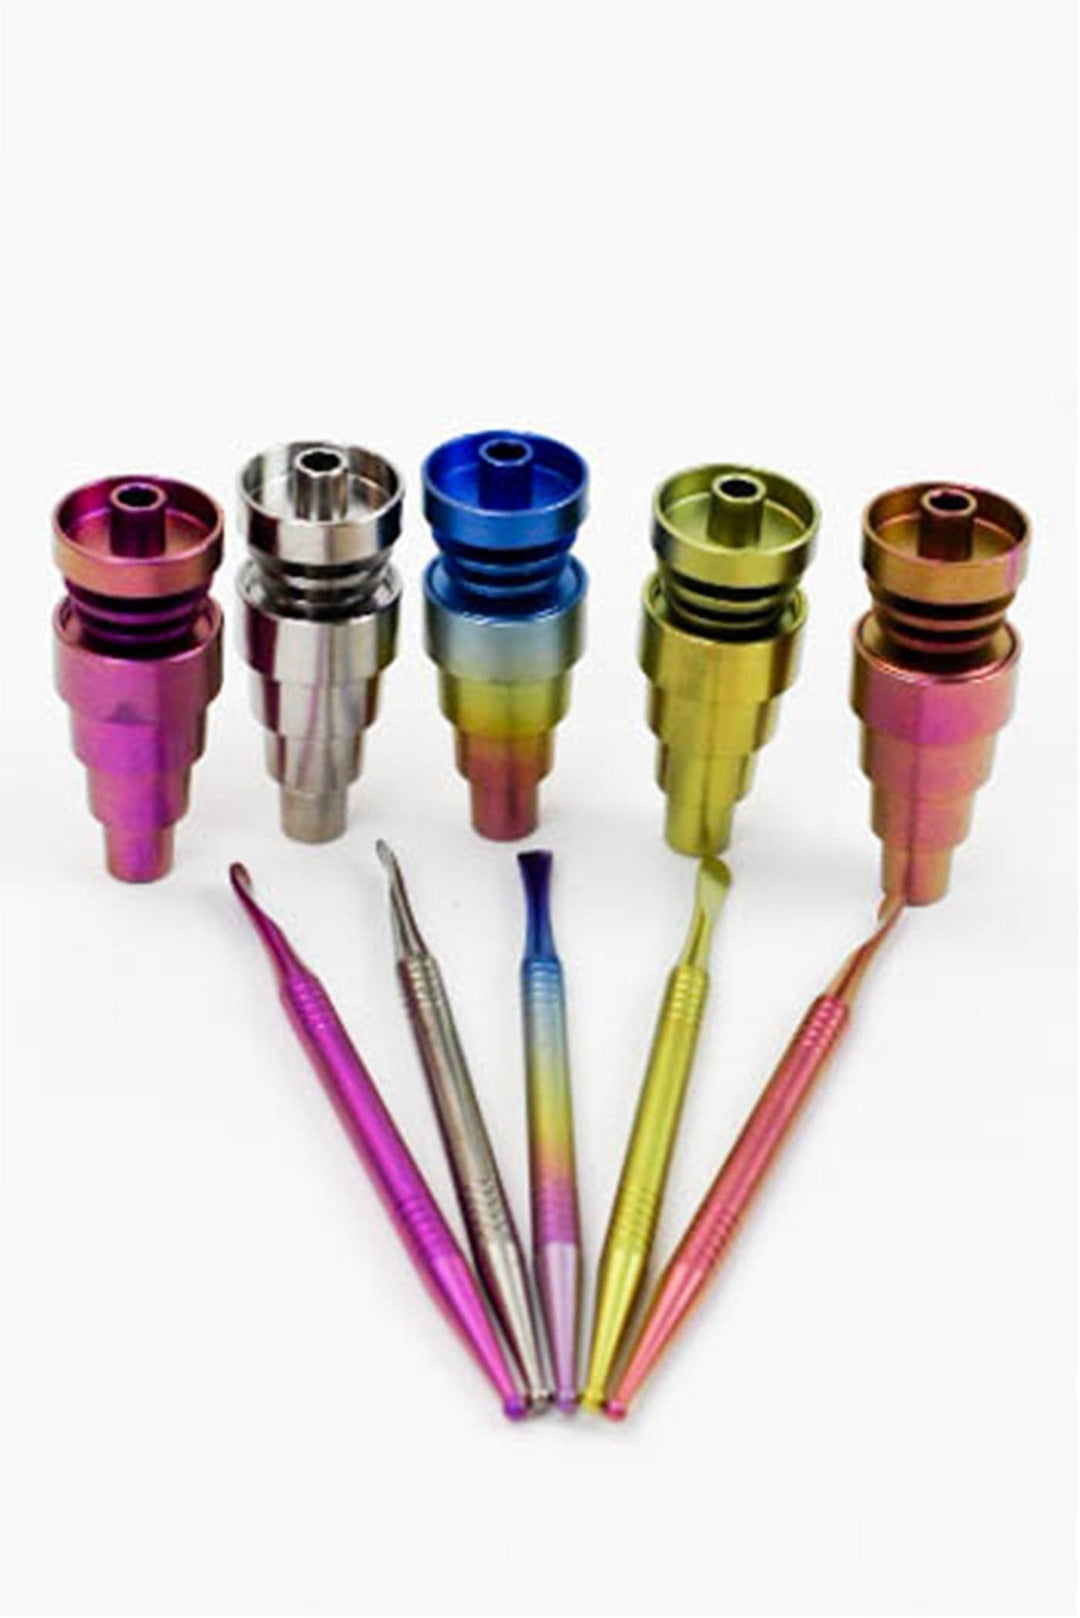 Titanium Nails & Dab Domes For Sale: Find the Best Ones! – Mile High ...